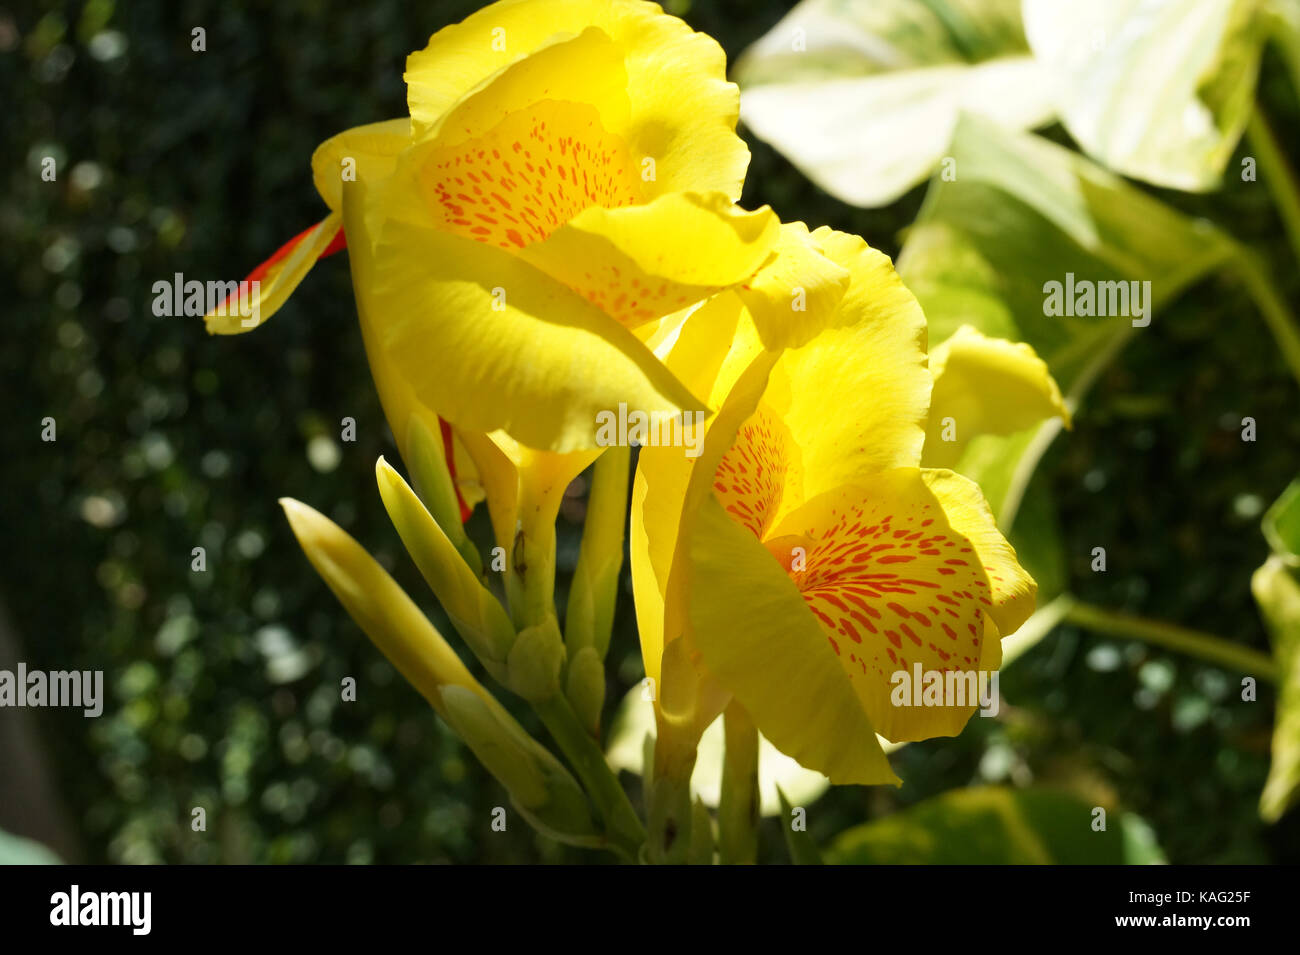 Yellow canna lily with red spots in the inside. Stock Photo